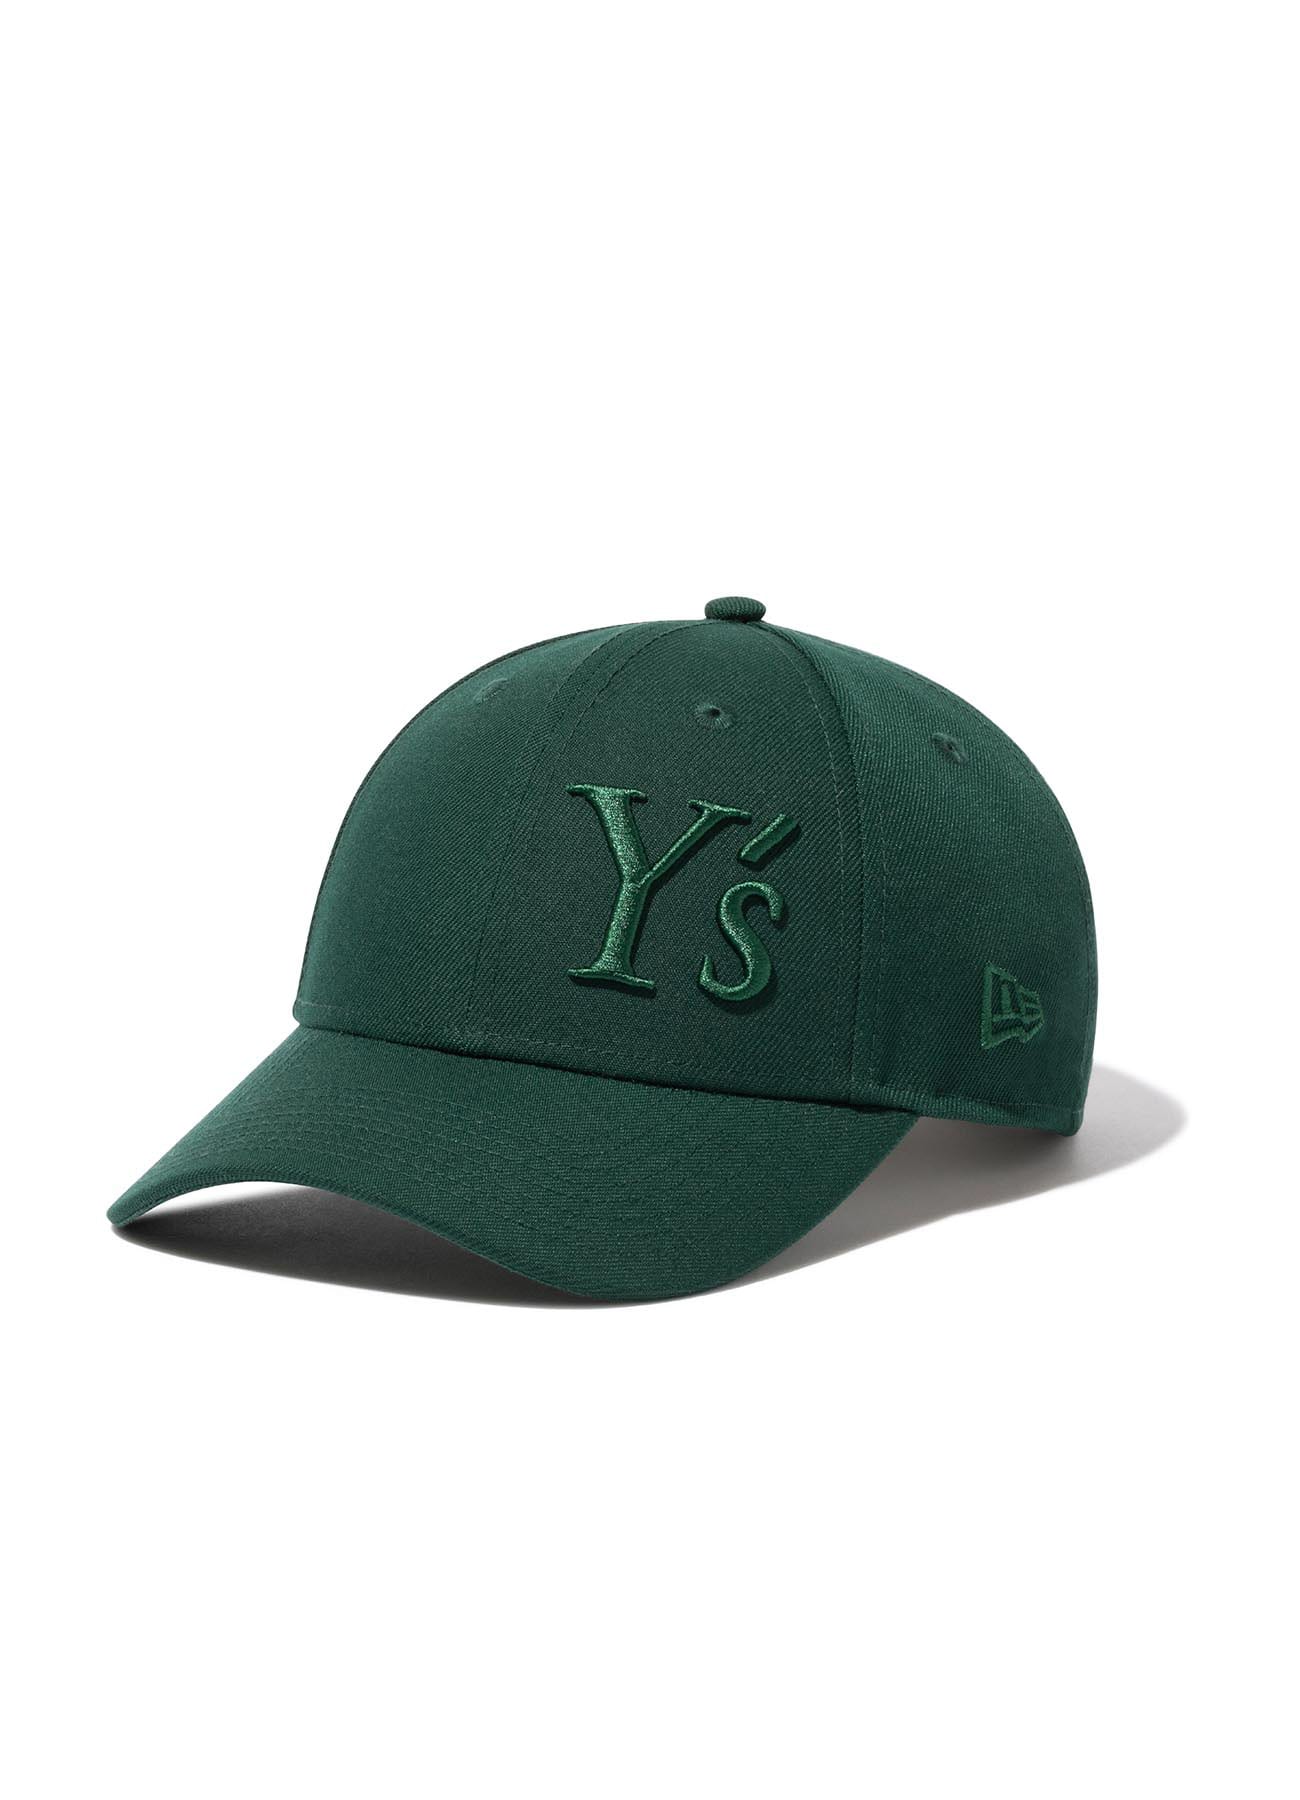 Y's × New Era] 9FORTY Y's LOGO CAP(FREE SIZE Green): Y's｜THE SHOP 